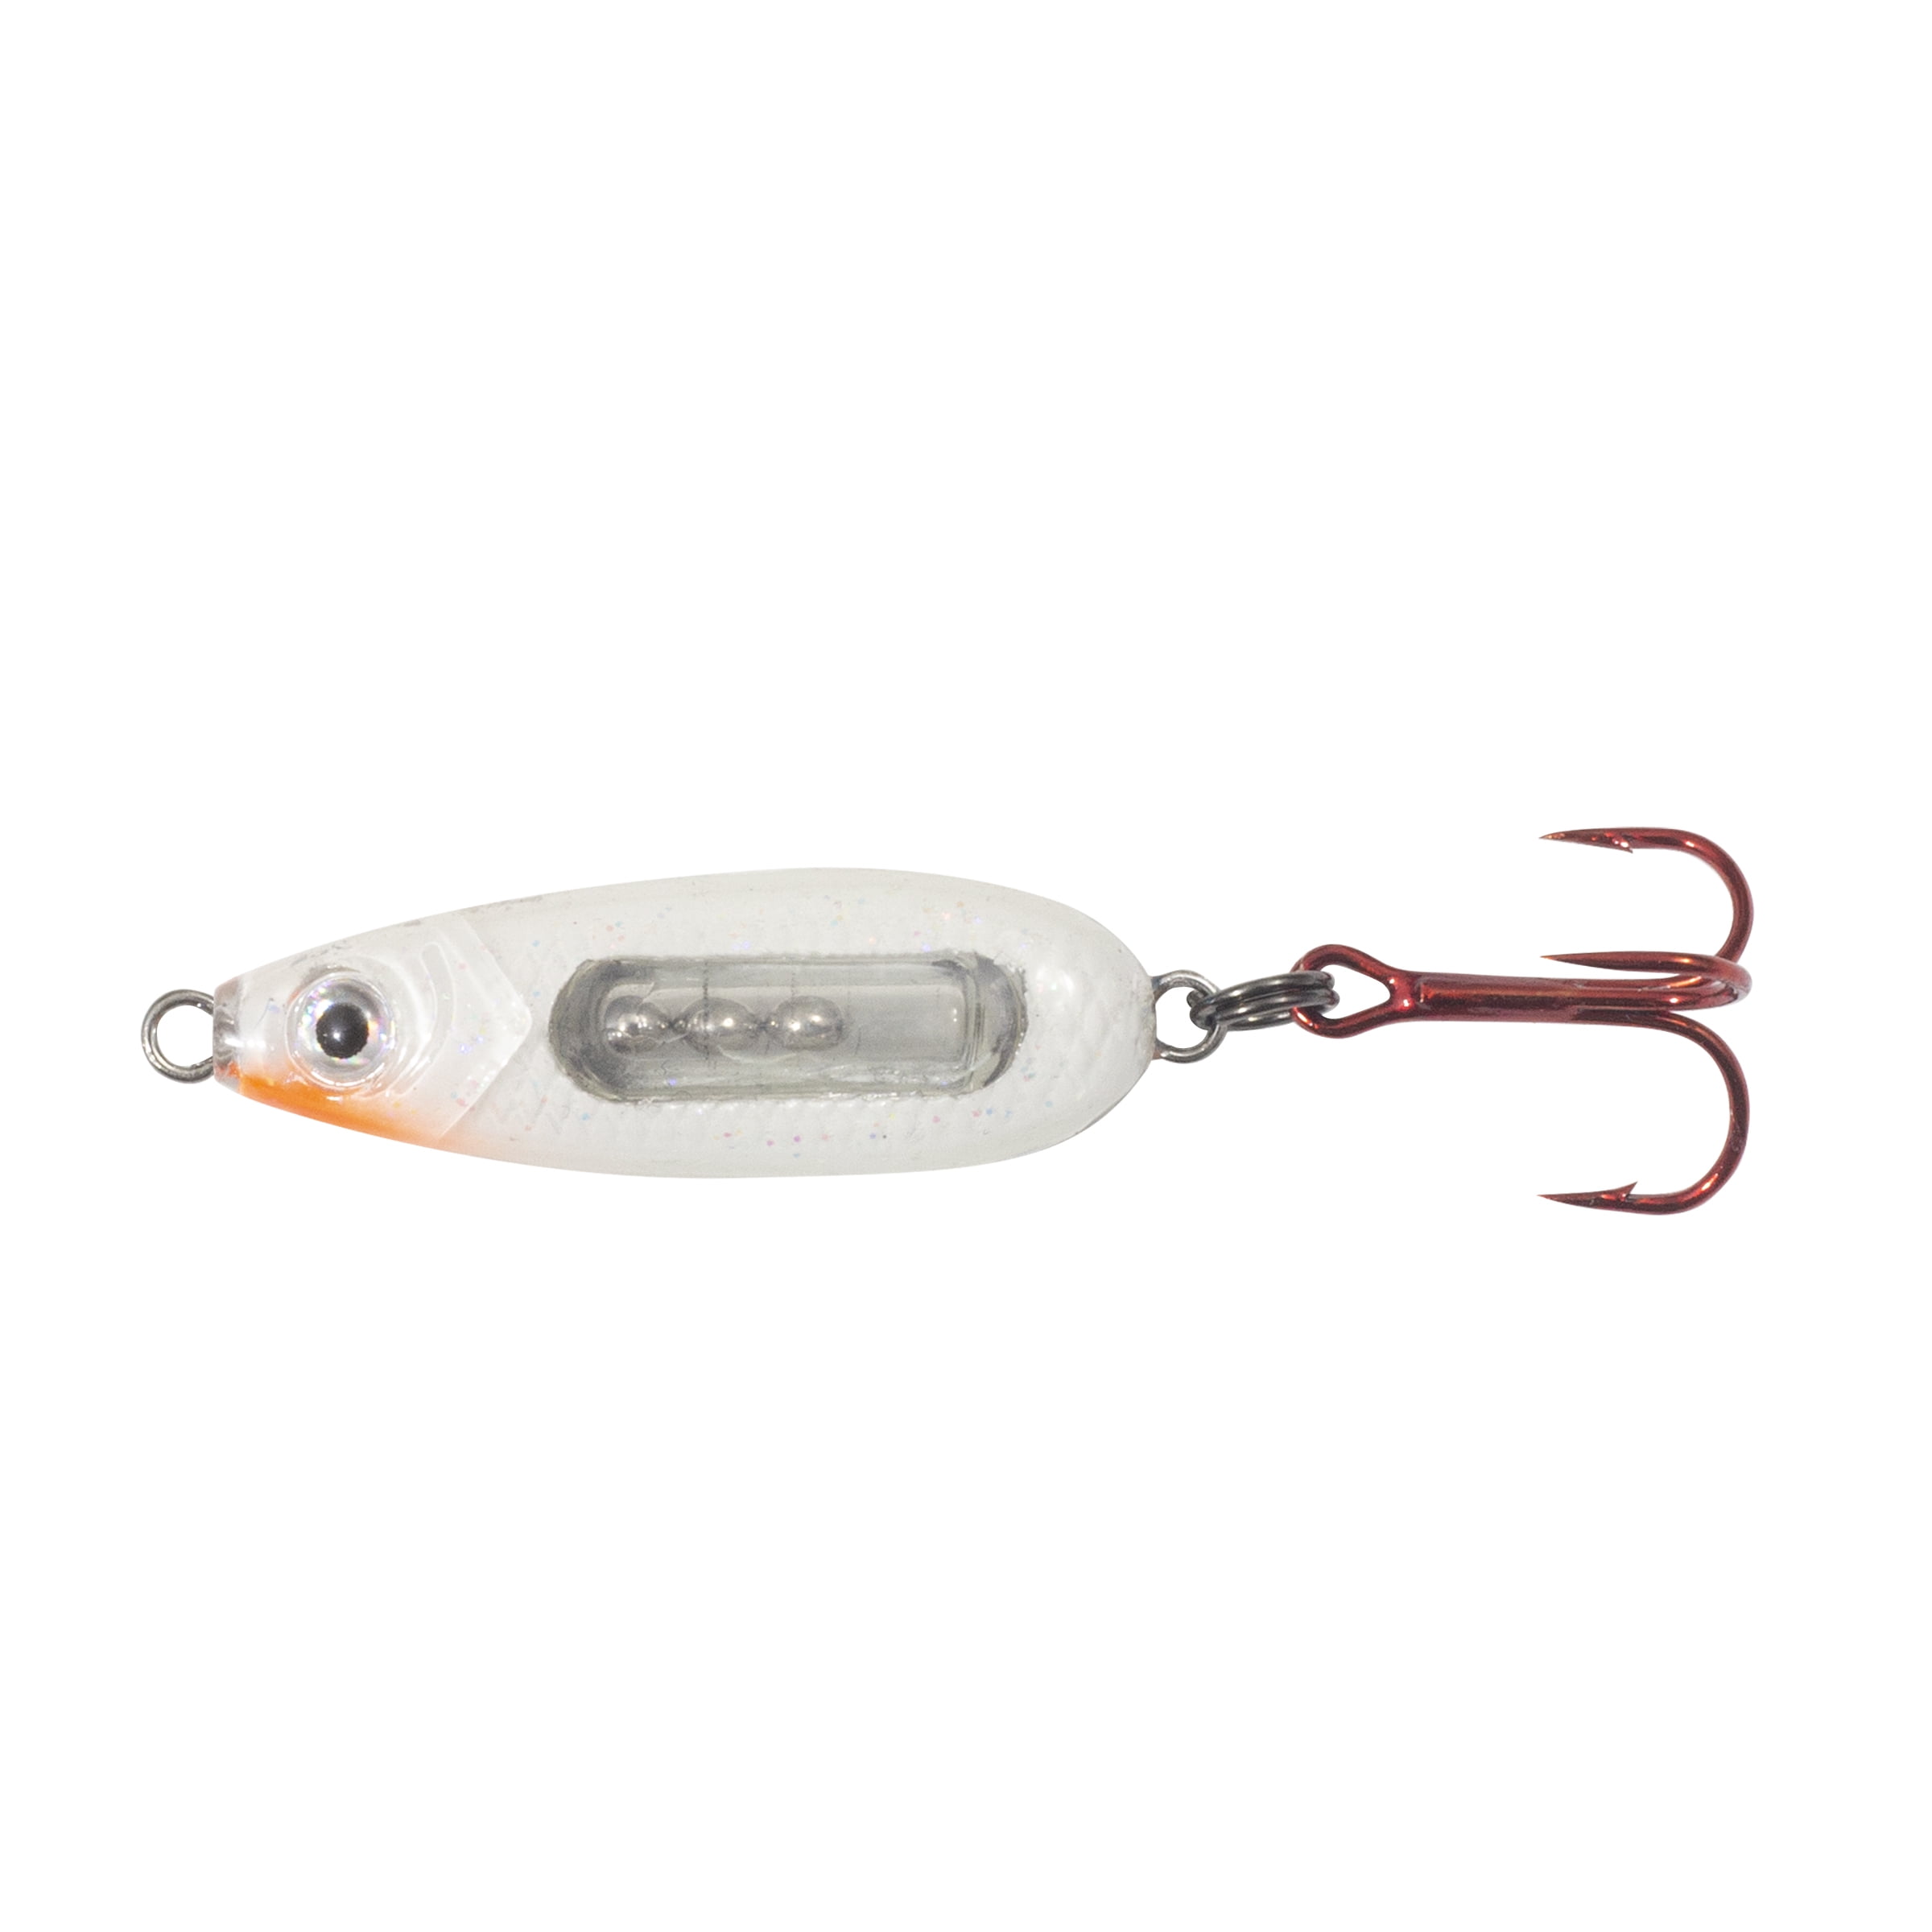 NORTHLAND FISHING TACKLE GLASS BUCK-SHOT SPOON, 1/8 oz, Glow White, 1 Pack  